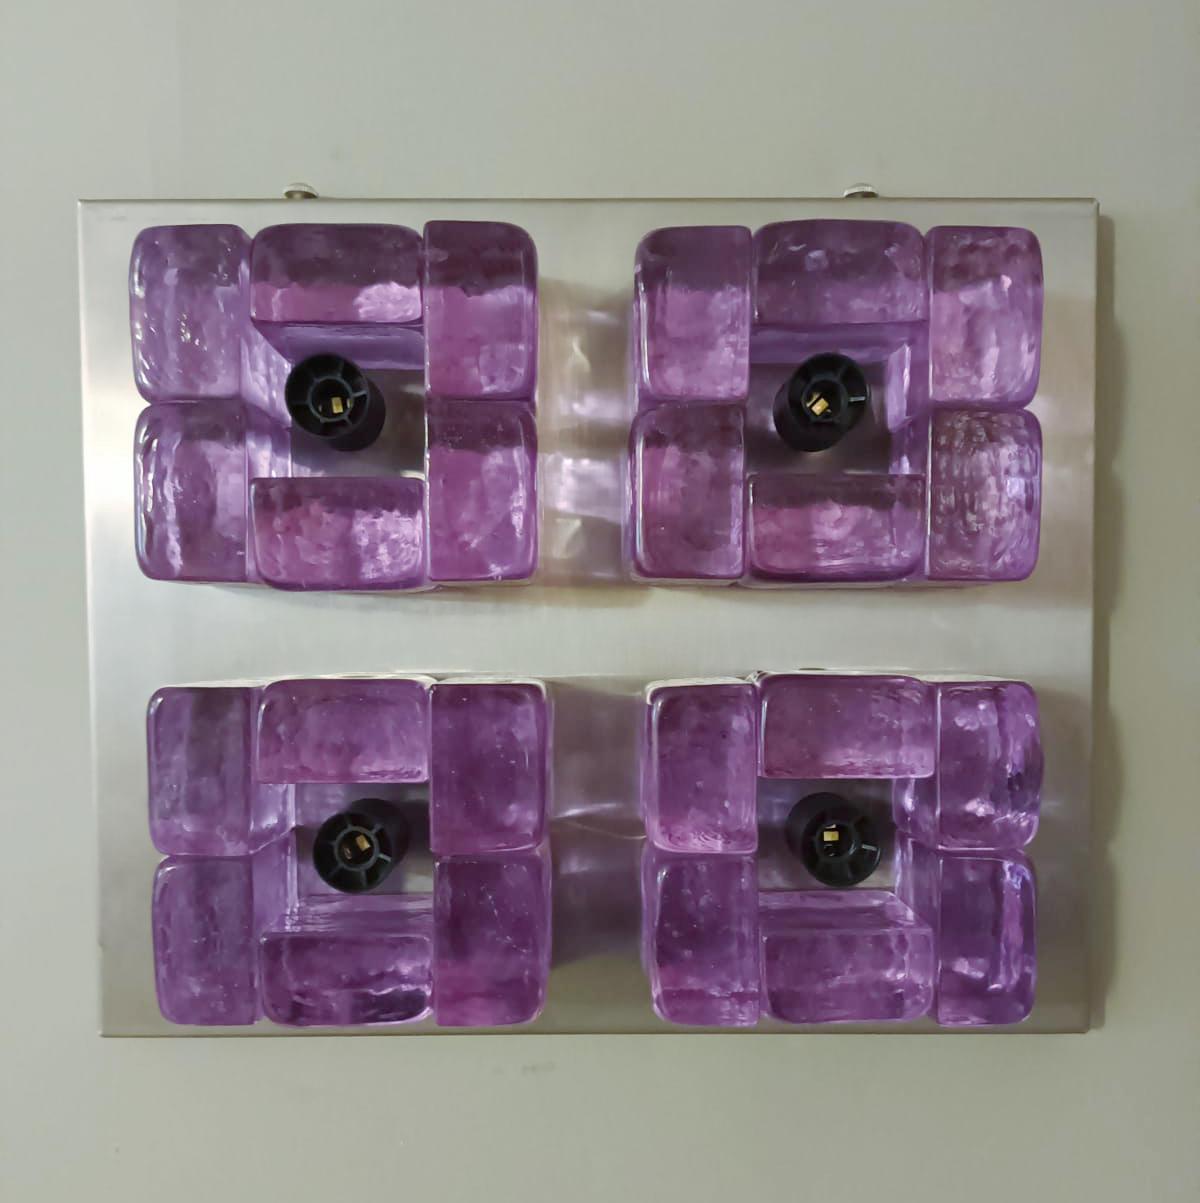 Vintage Italian wall lights or flush mounts with hand blown amethyst Murano glasses cubes mounted on brushed nickel frames / made in Italy circa 1970s
Measures: height 11.5 inches, width 14 inches, depth 3 inches
4 lights / E12 or E14 type / max